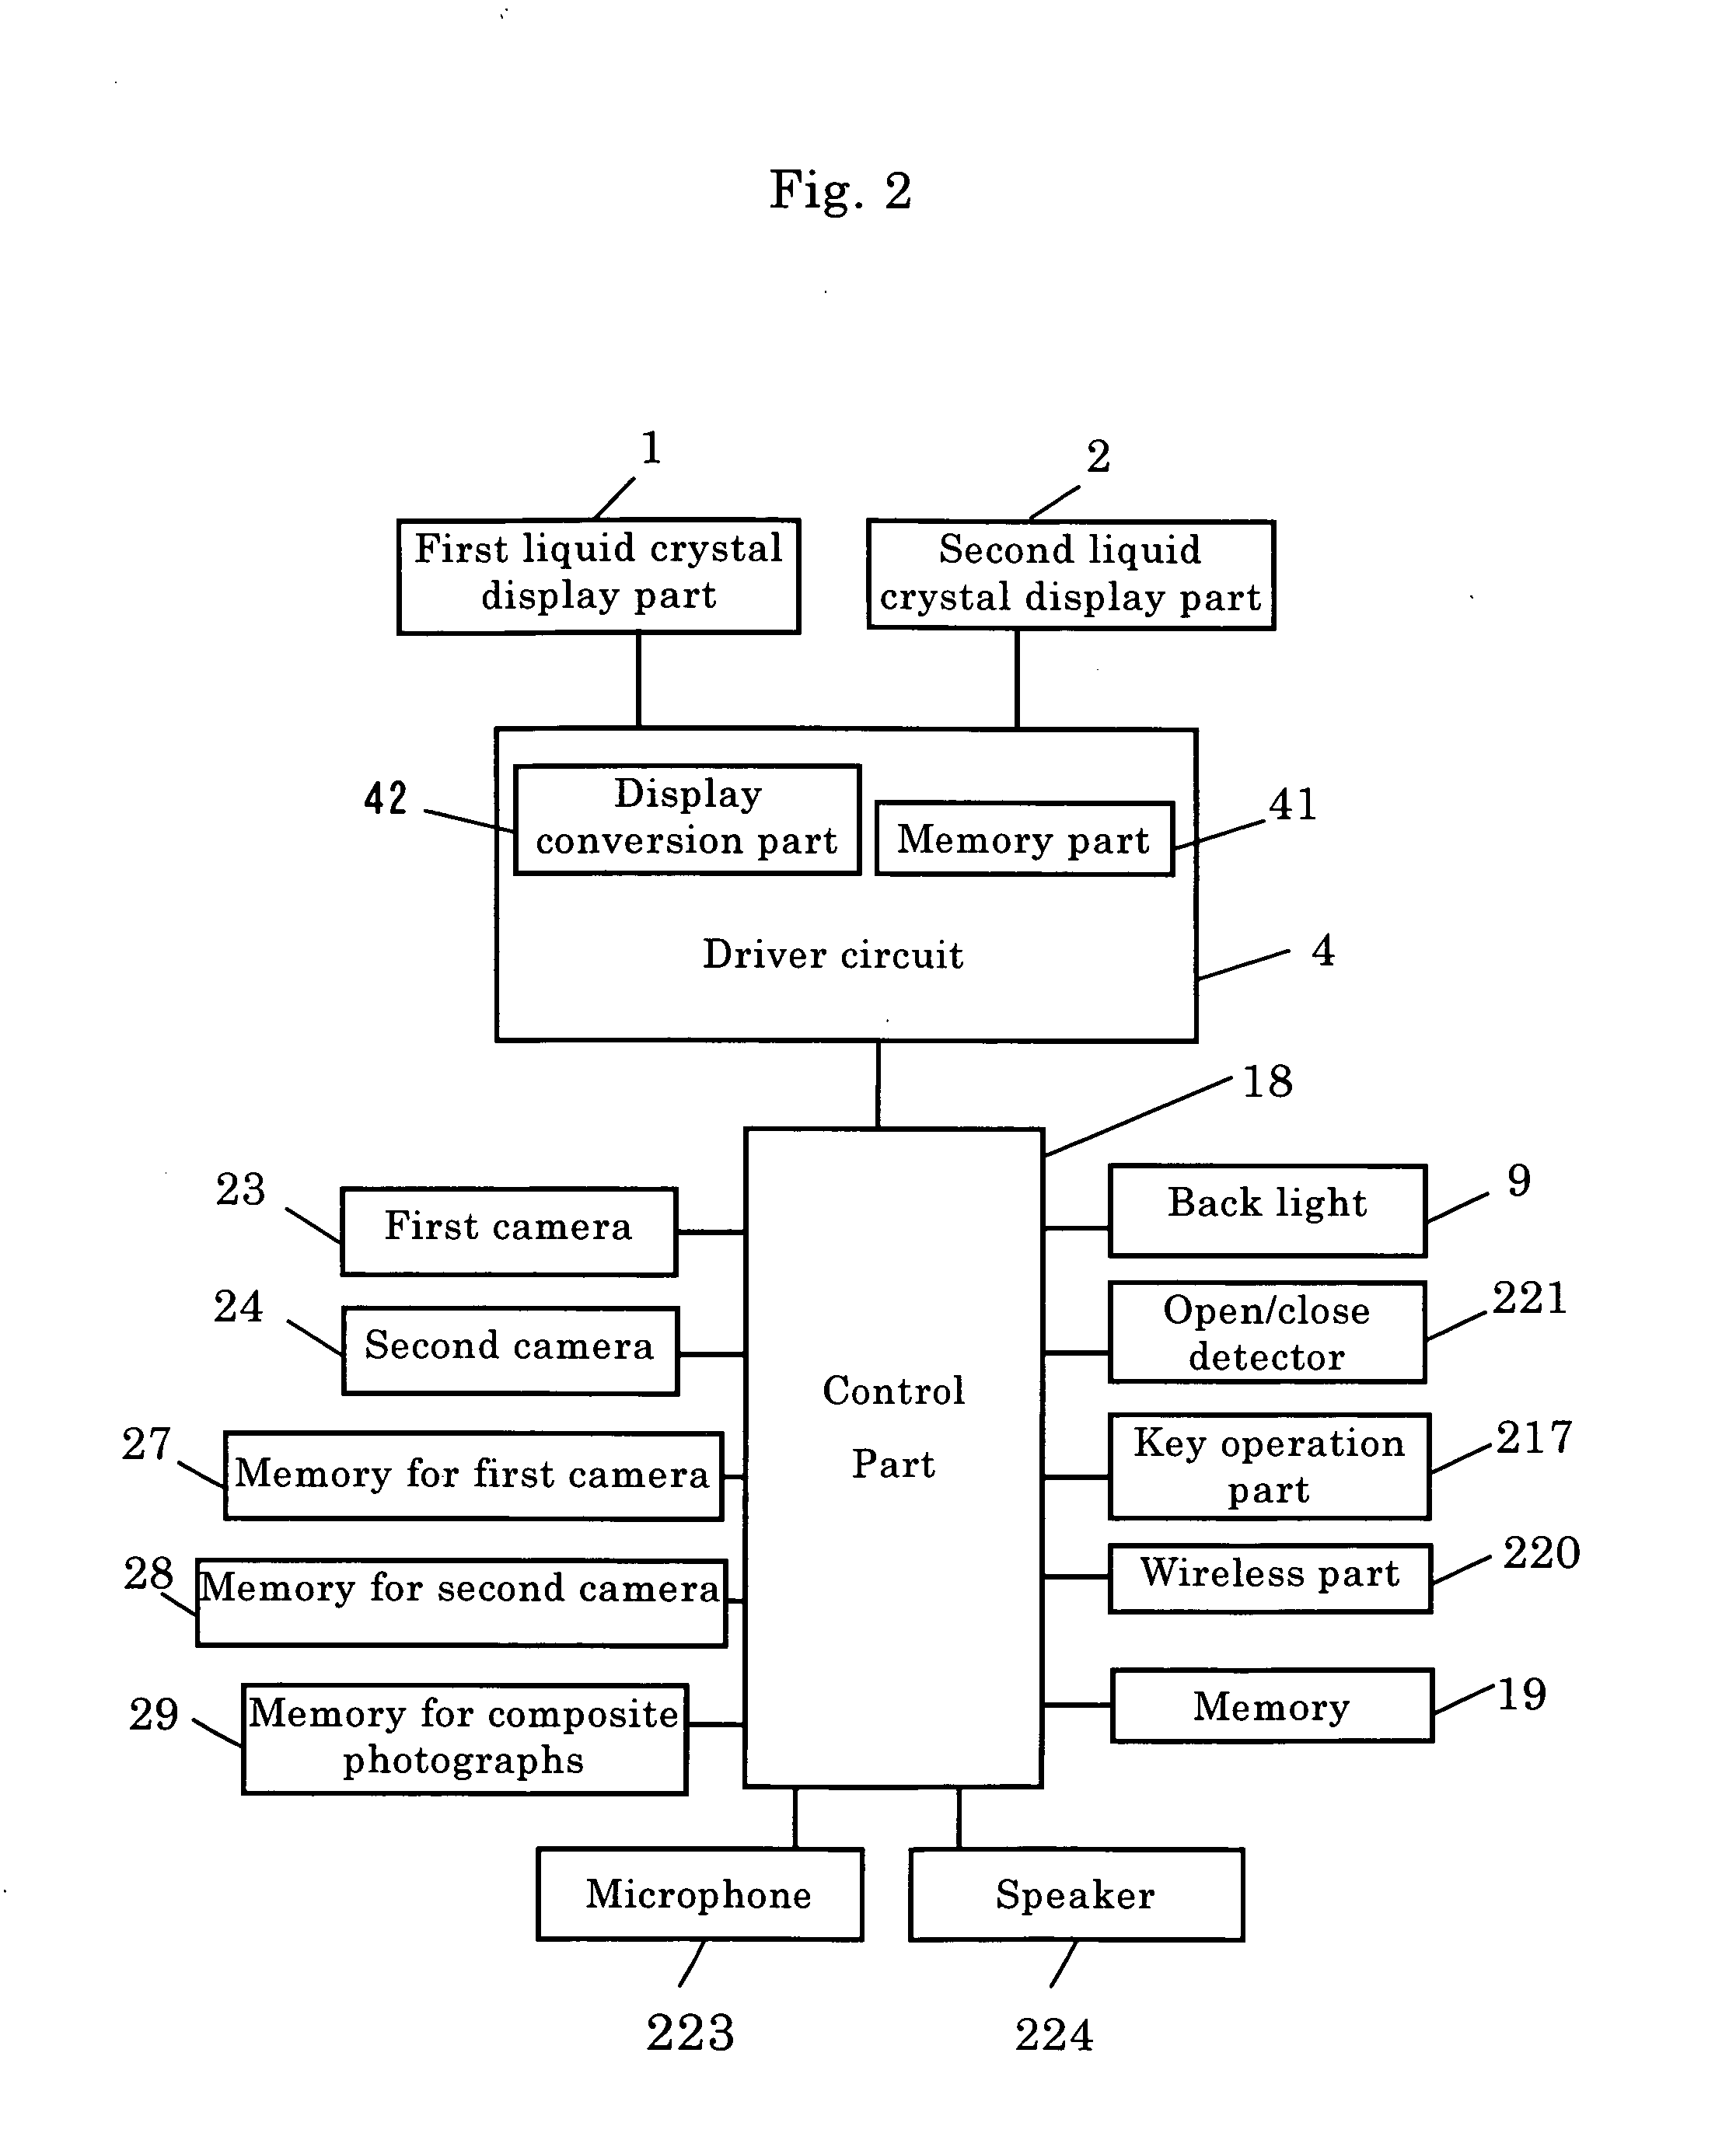 Liquid crystal display device, and portable telephone device using liquid crystal display device